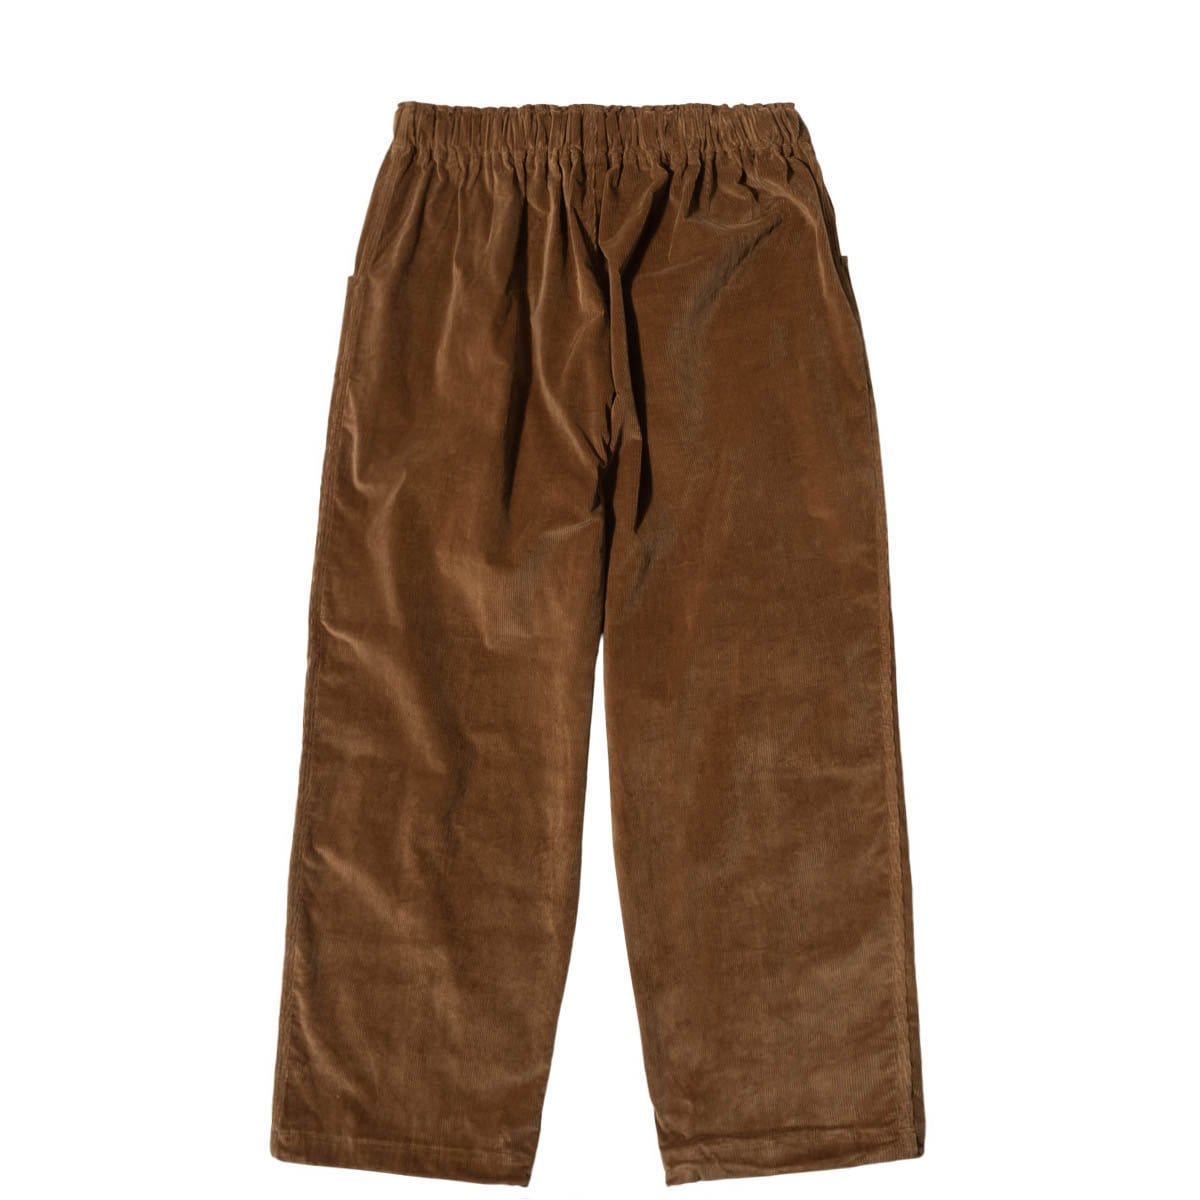 South2 West8 Bottoms BELTED C. S. PANT